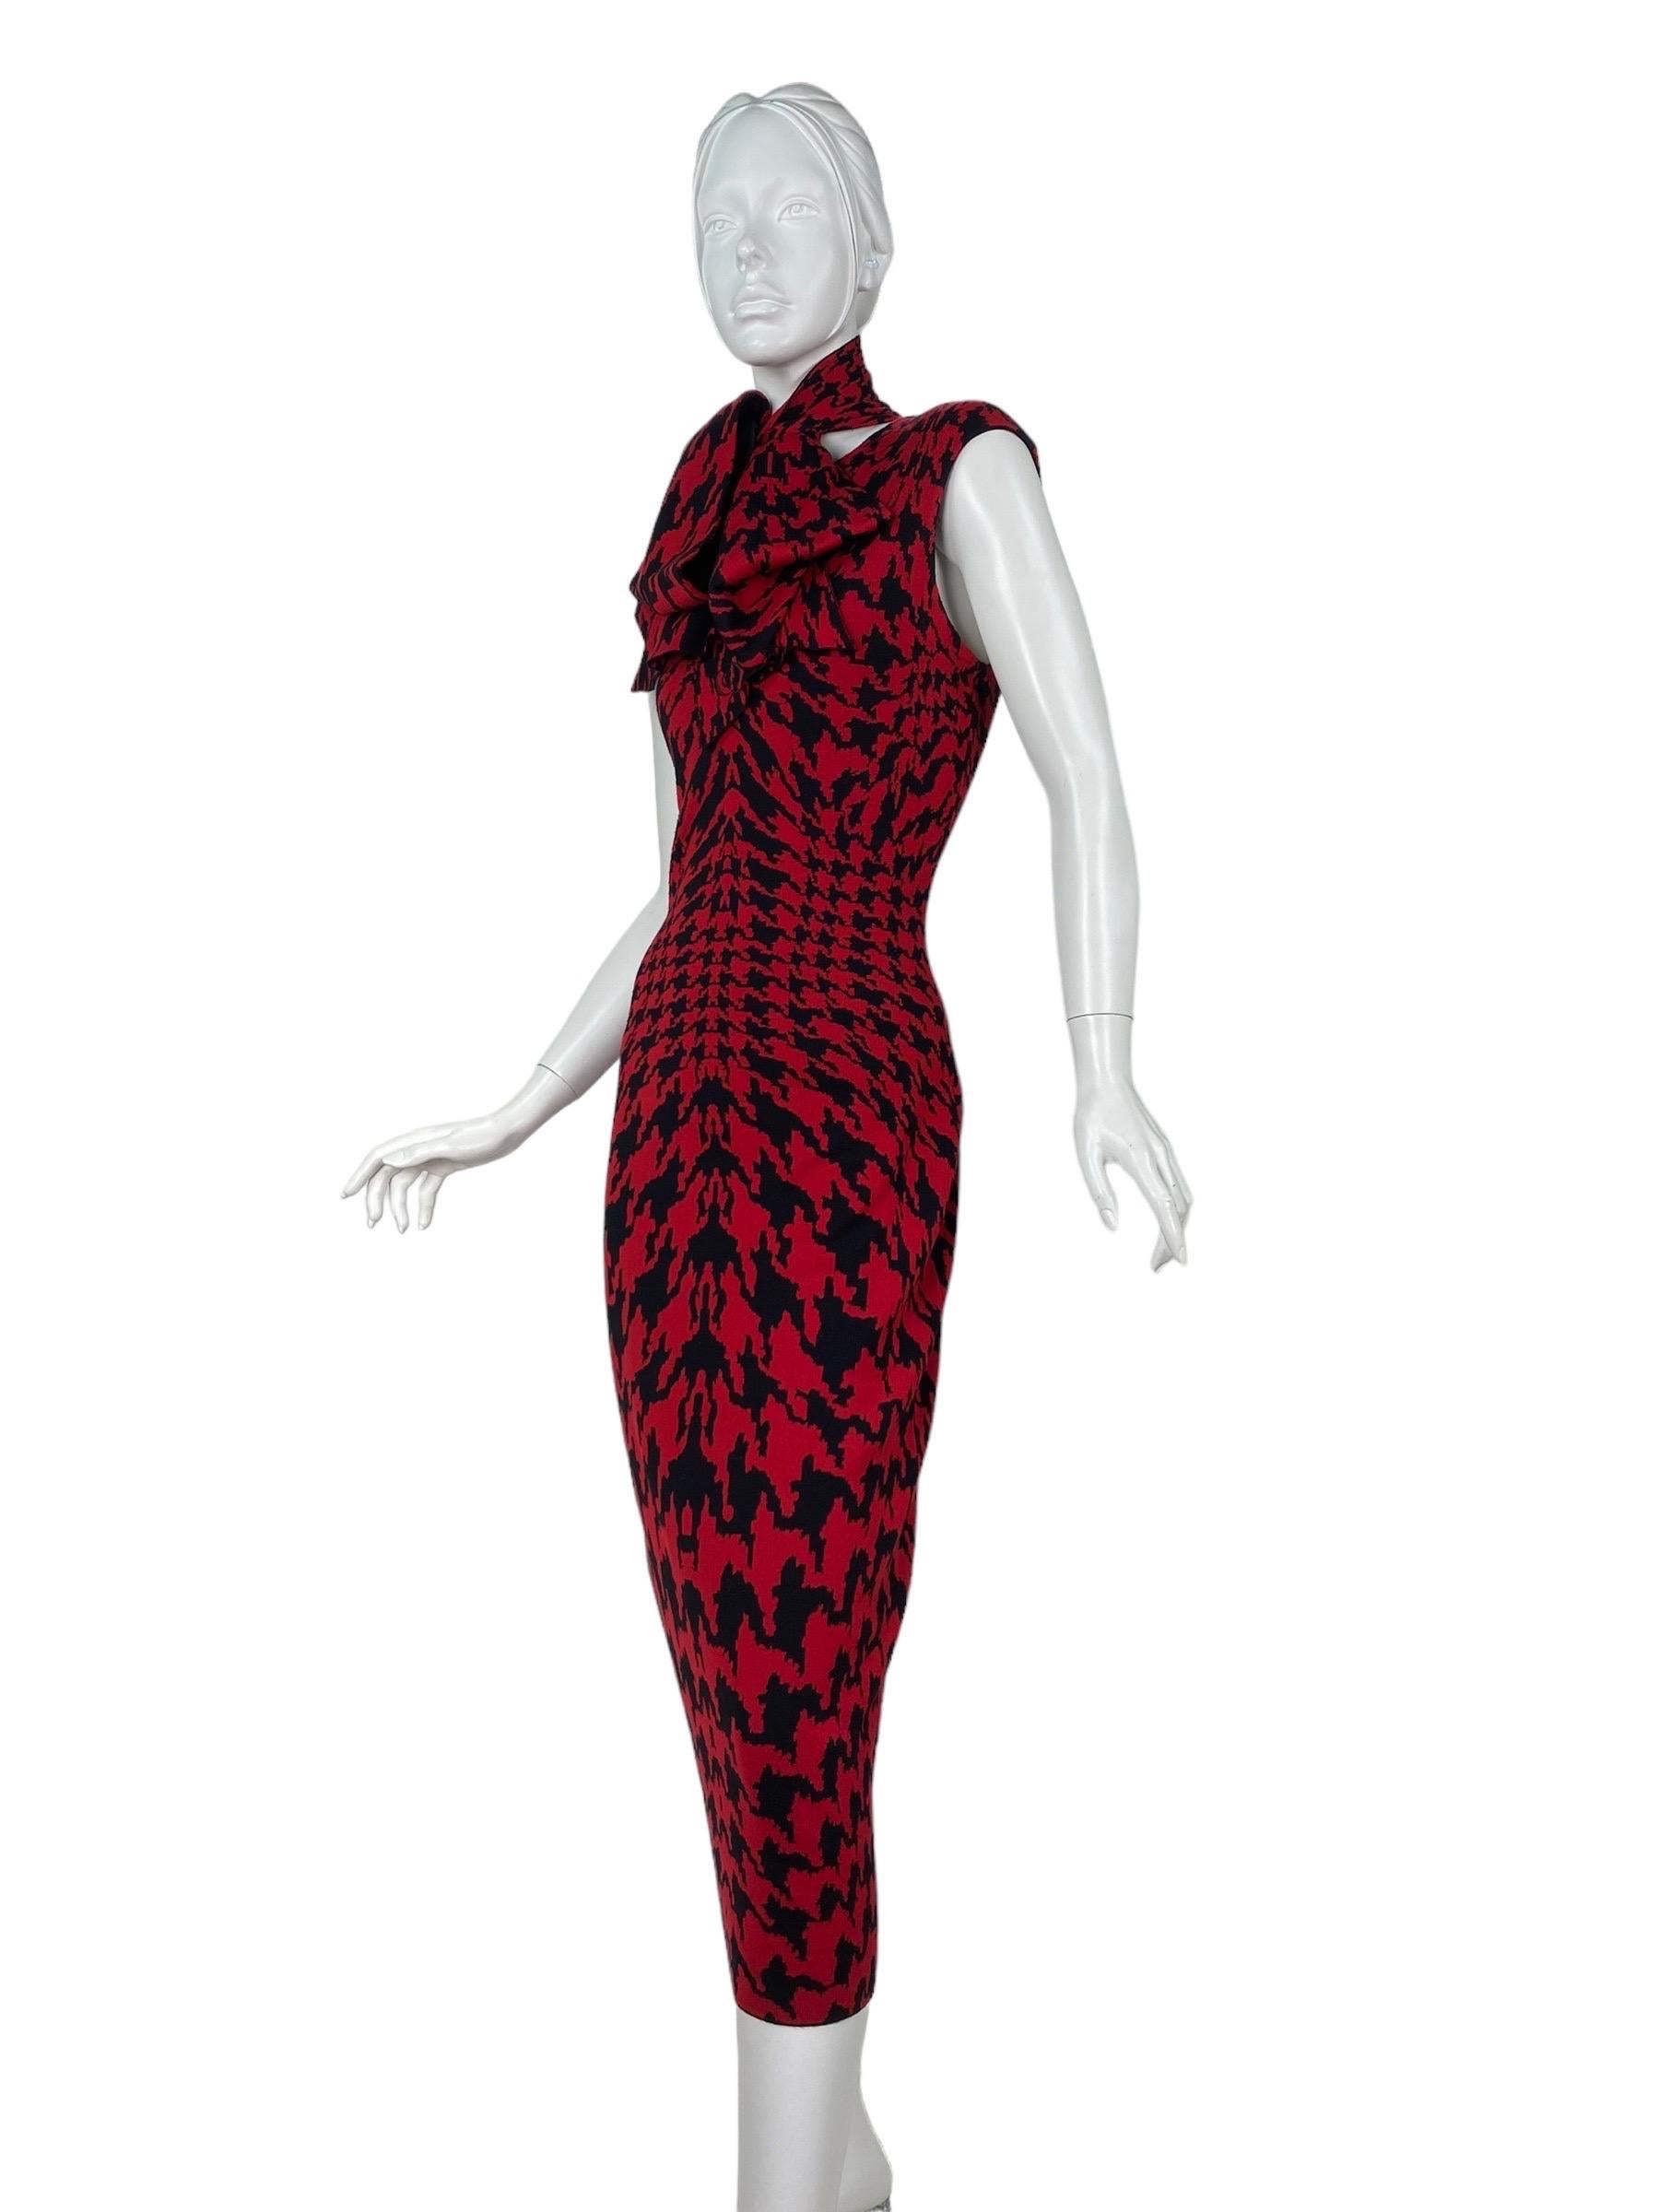 F/W 2009 Iconic Alexander Mcqueen houndstooth print knit dress  For Sale 1